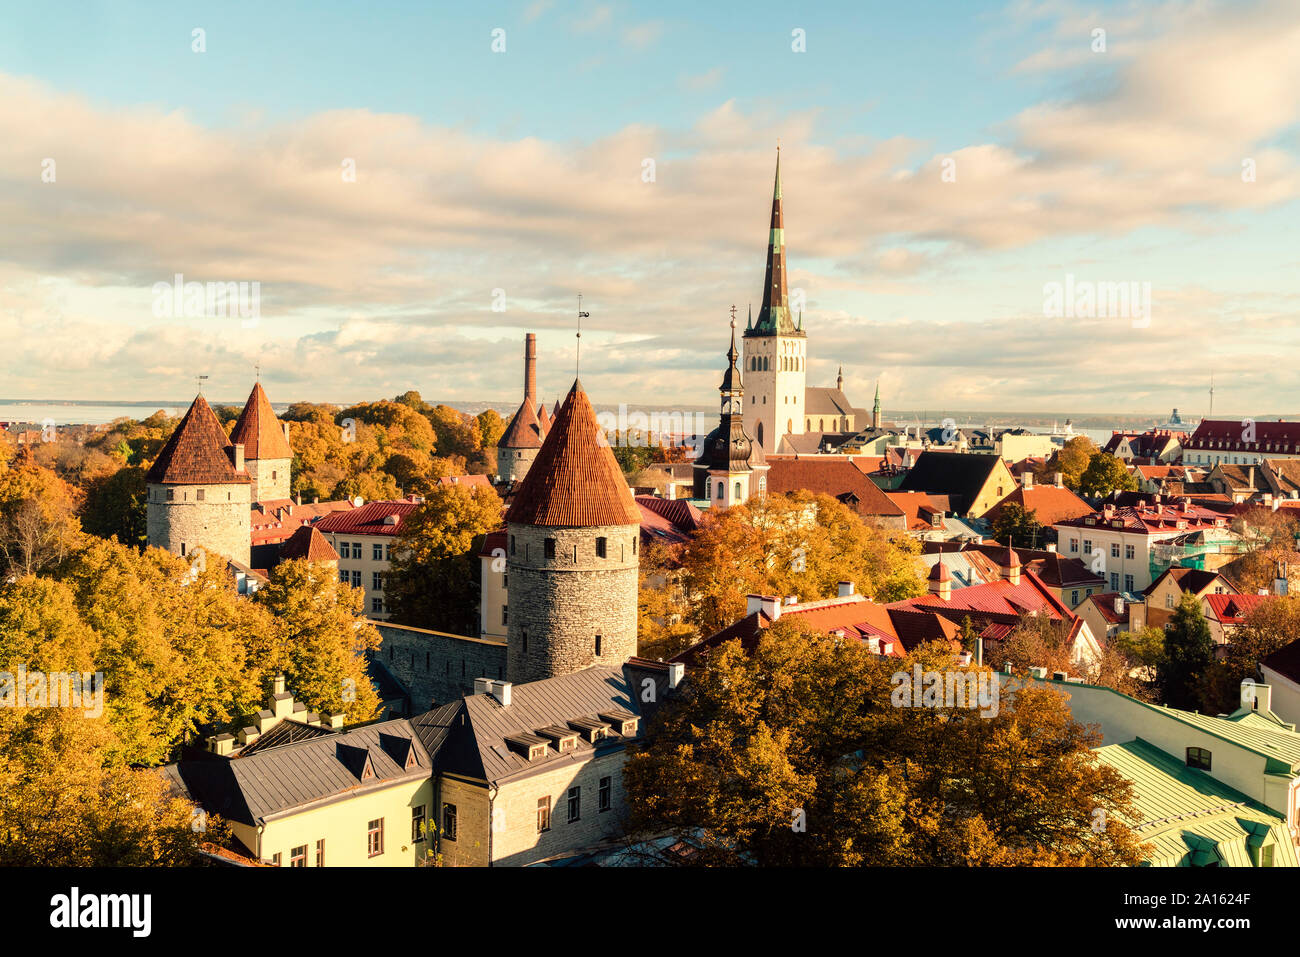 View of the old city with St. Olaf's Church and the old city walls, Tallinn, Estonia Stock Photo